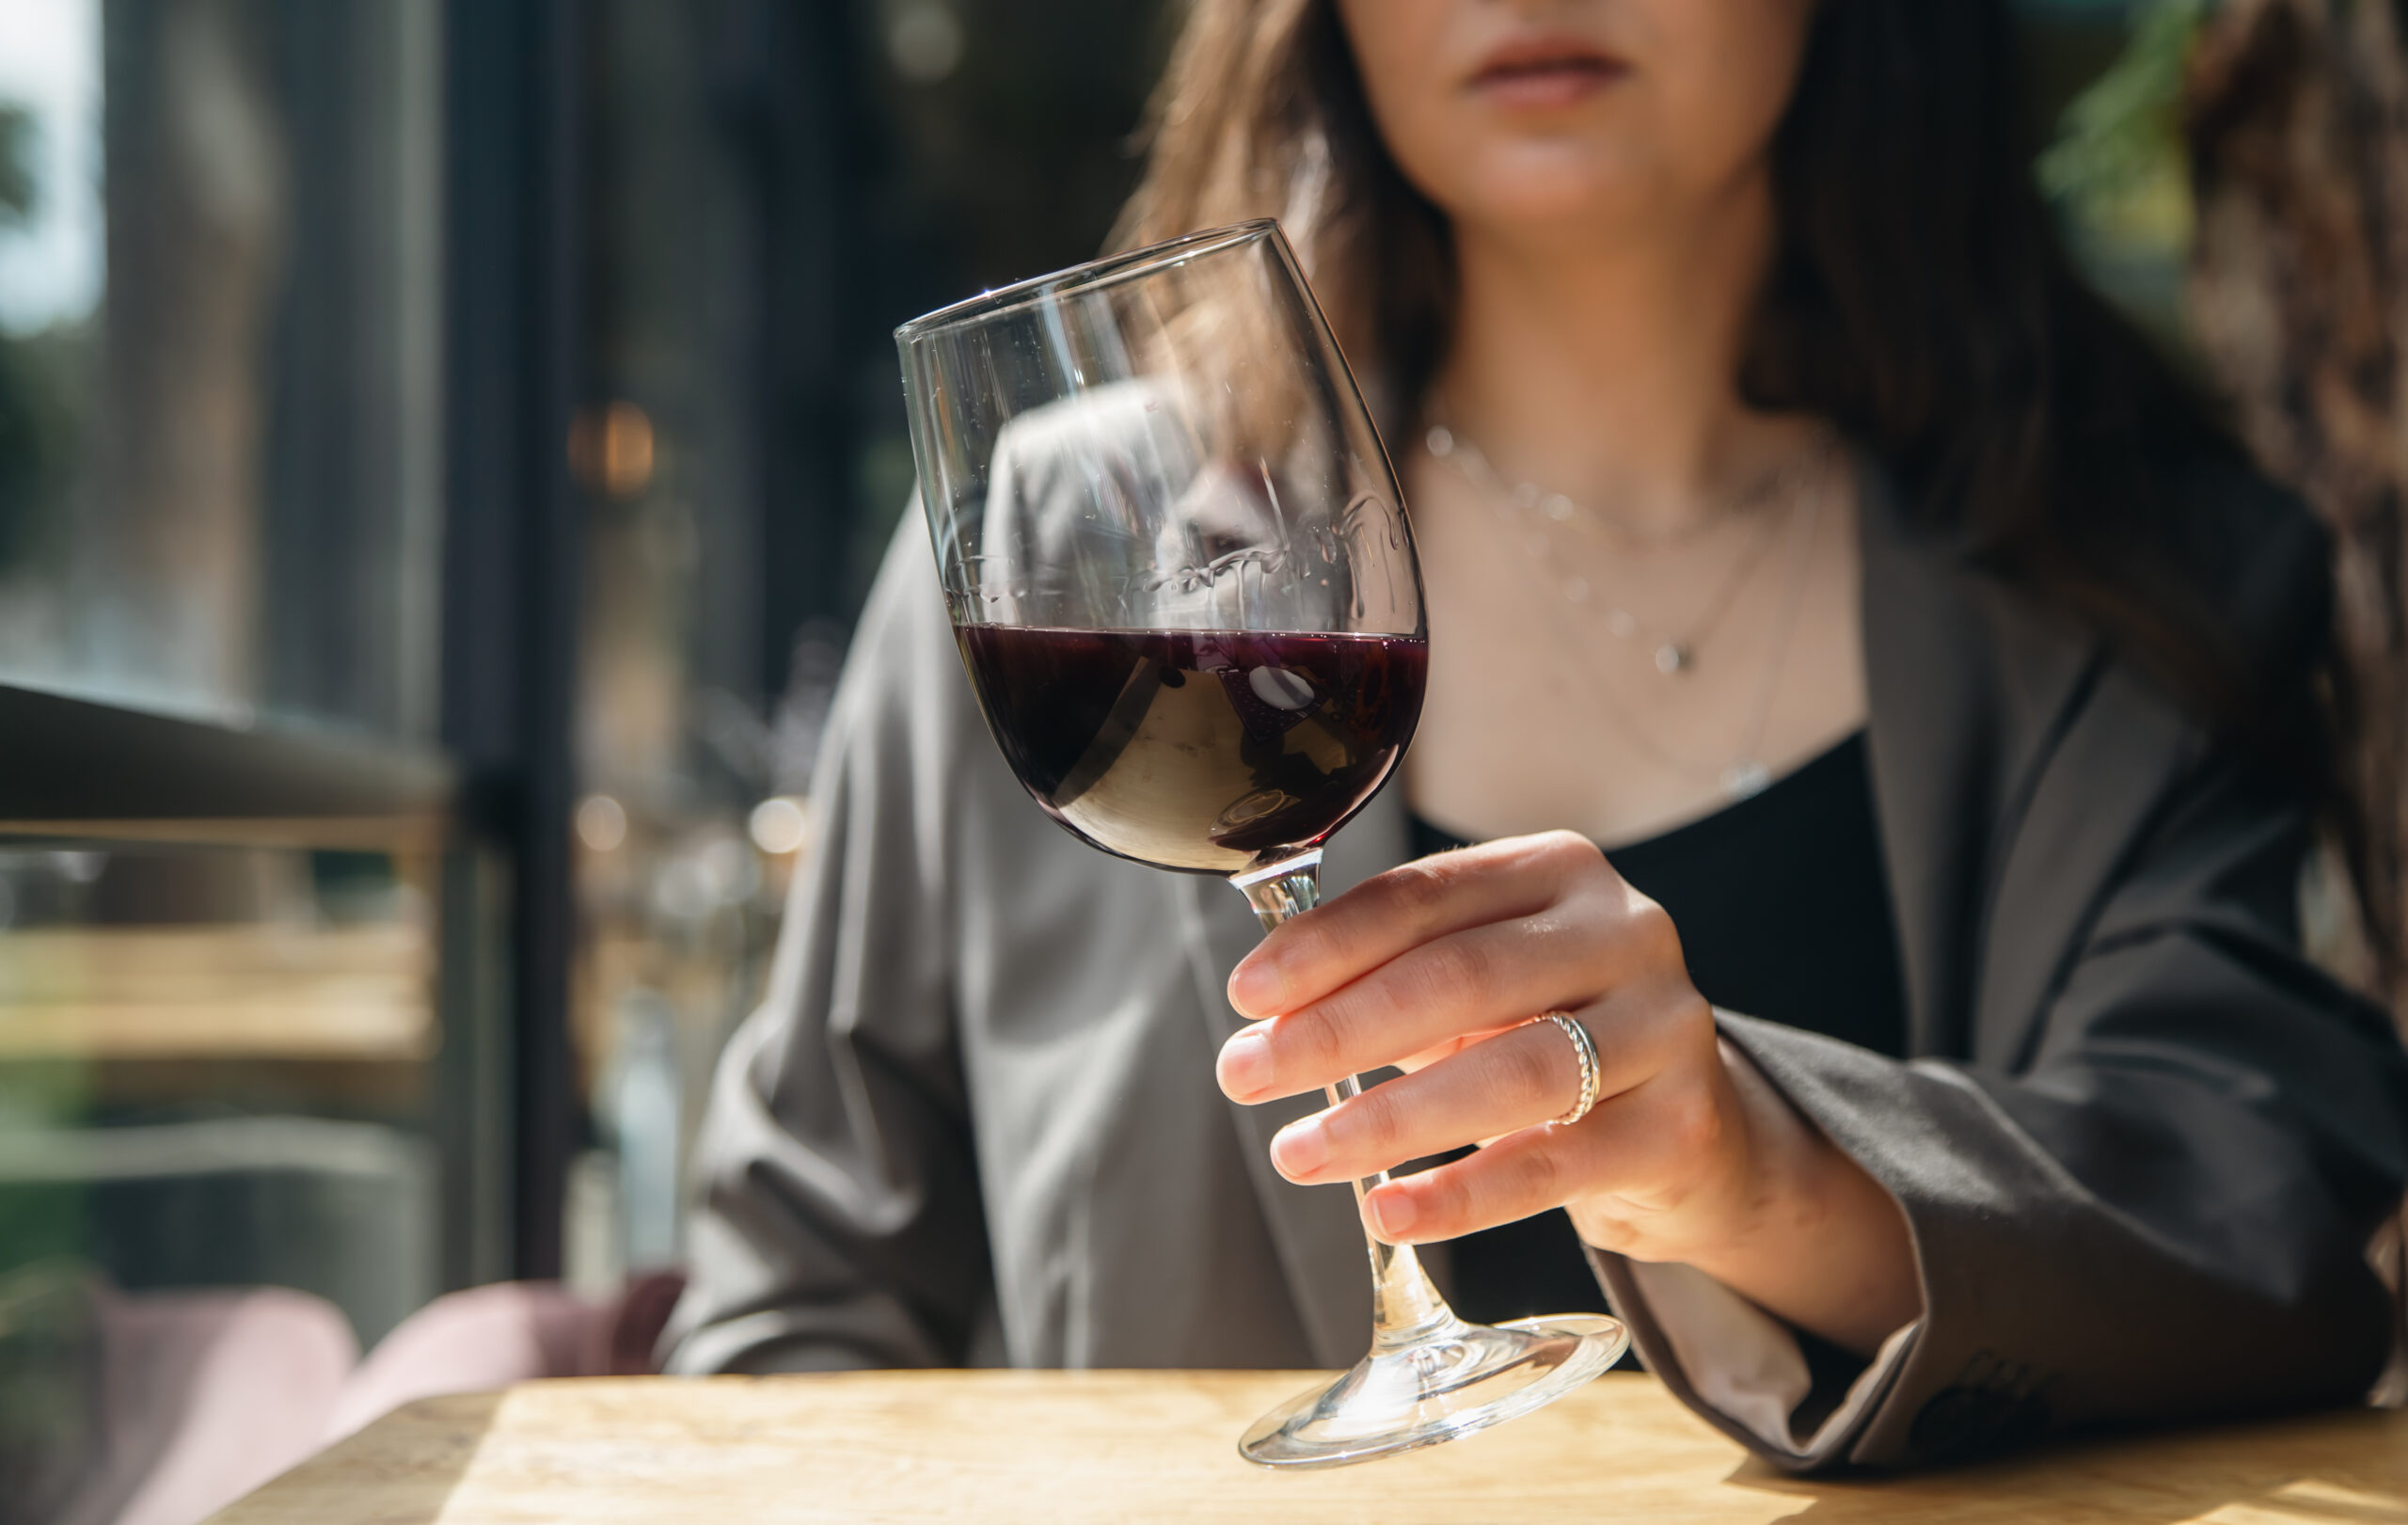 Close-up image of a woman holding a wine glass